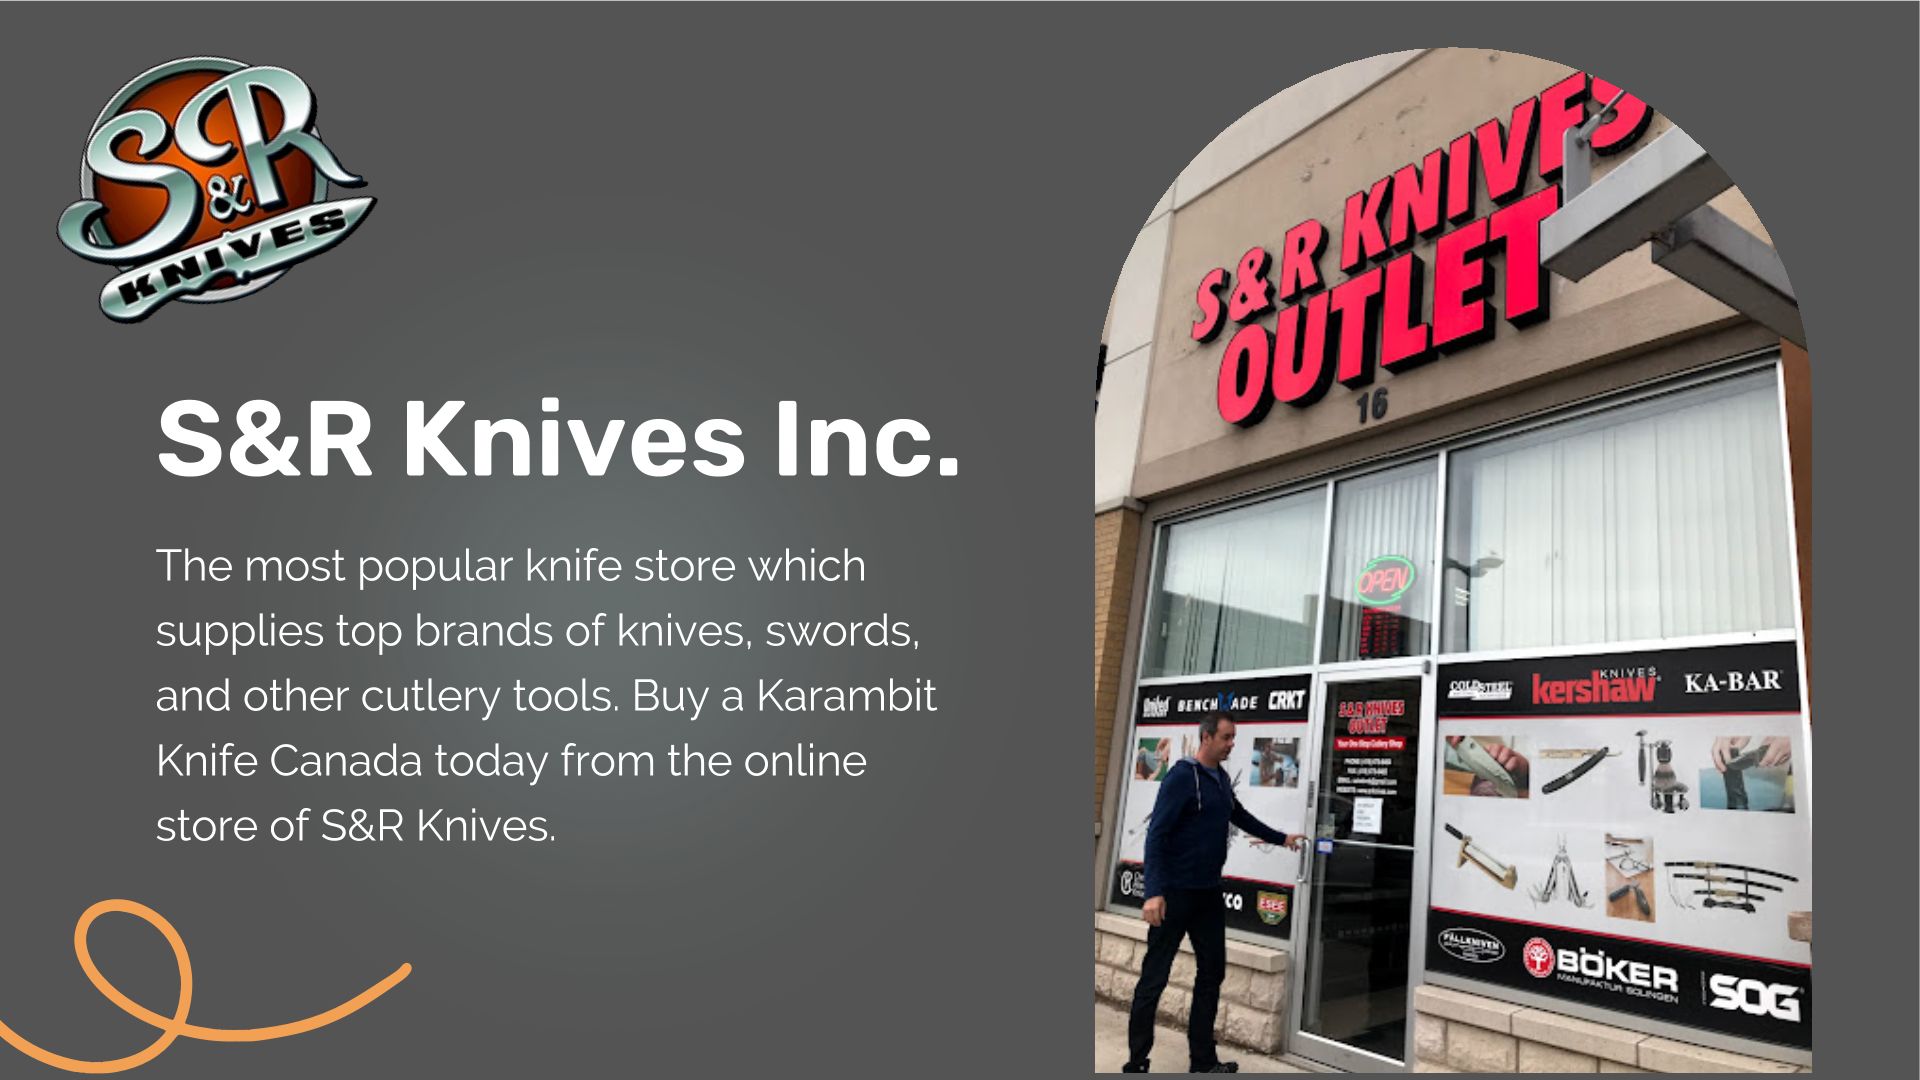 What Can A Karambit Knife Canada Come In Handy For?